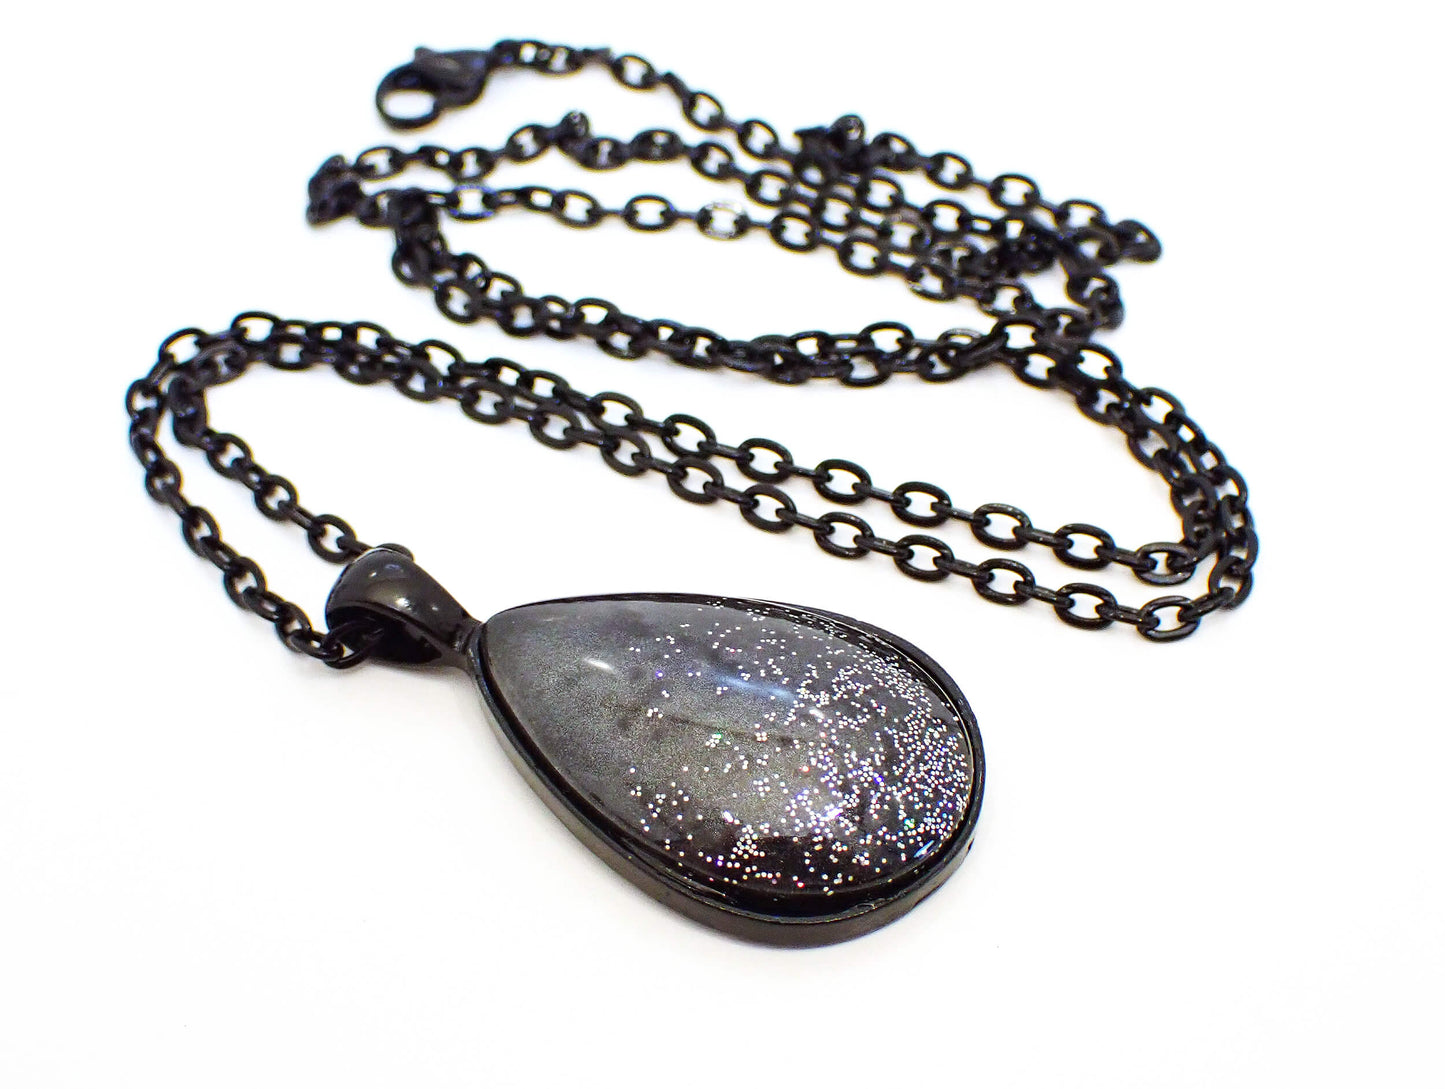 Black and Gray Handmade Resin Teardrop Pendant Necklace with Holographic Glitter